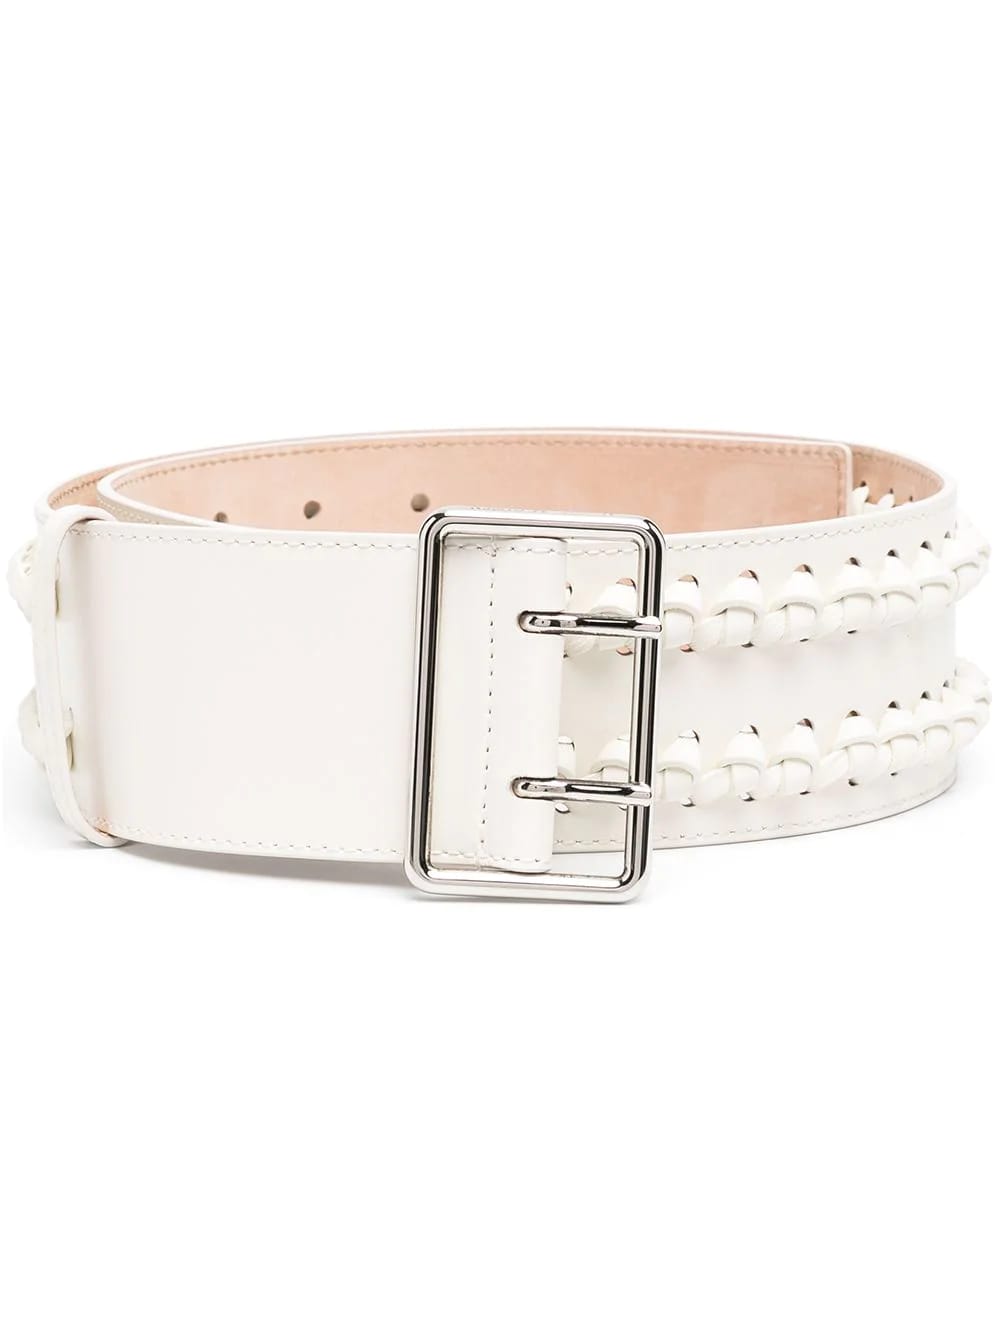 Alexander McQueen Woman Light Ivory Military Belt With Knots